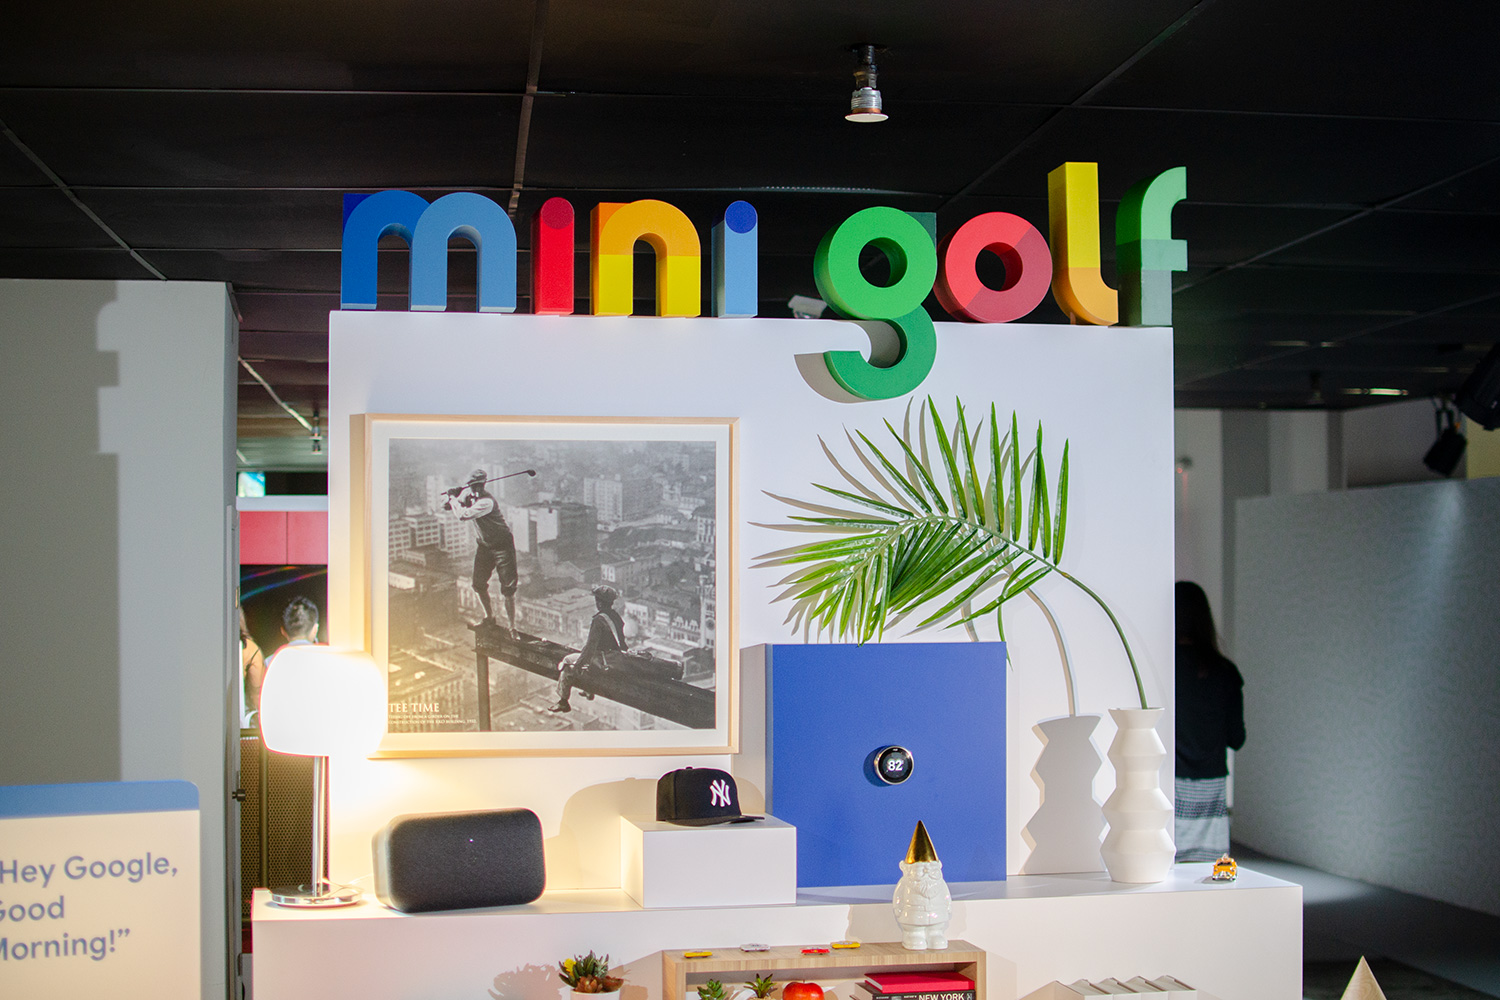 googles mini golf pop up event in nyc highlights its smart home products google display